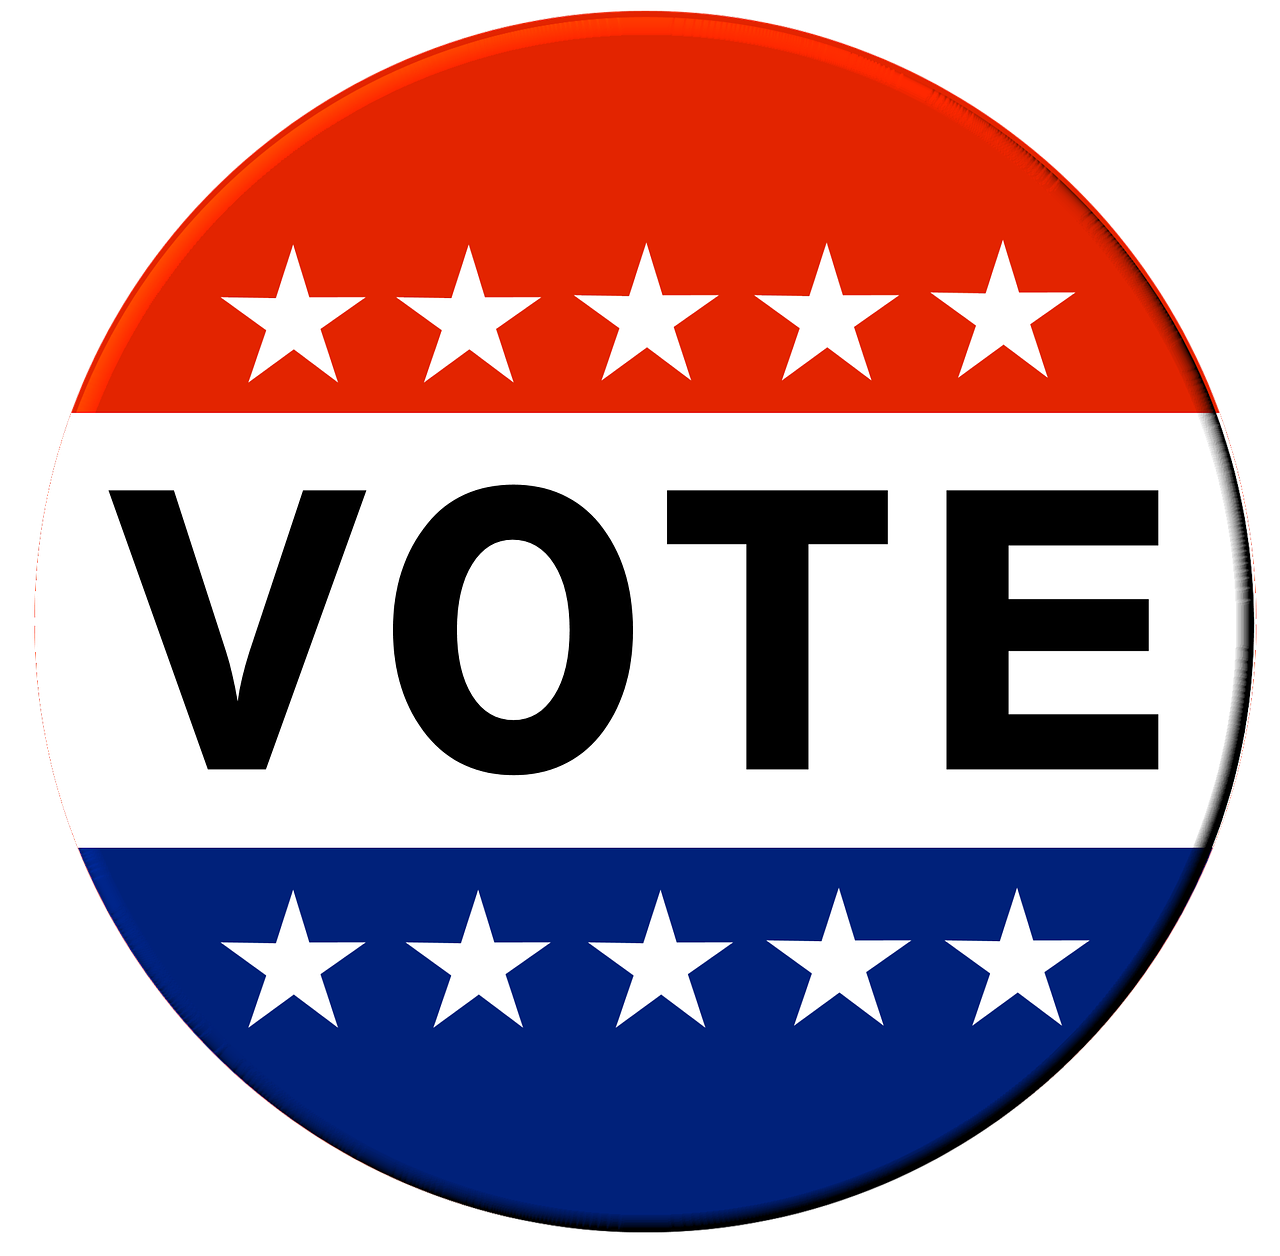 Pictured: Digital recreation of a "VOTE" button in red, white, and blue. Picture credits to Pixabay.com credits to 